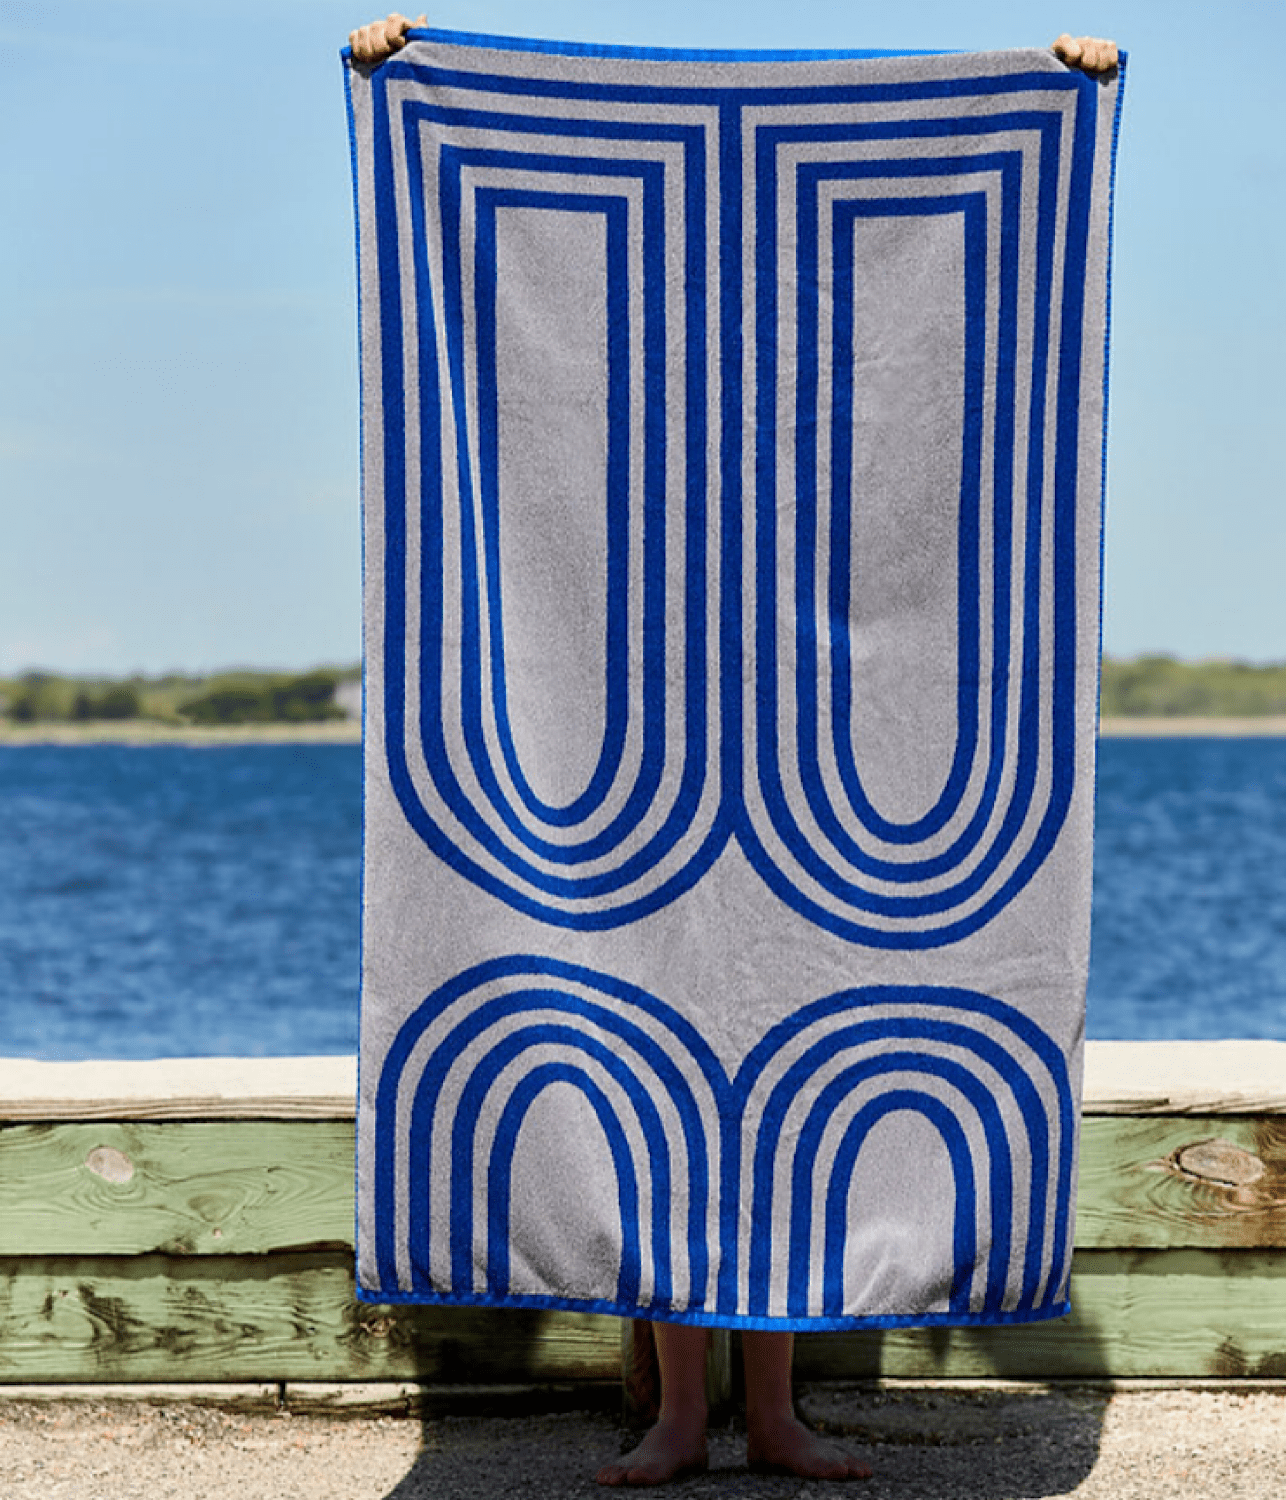 ARC TOWEL - COOL |LATERAL OBJECTS| LATERAL OBJECTS ARC TOWEL - COOL